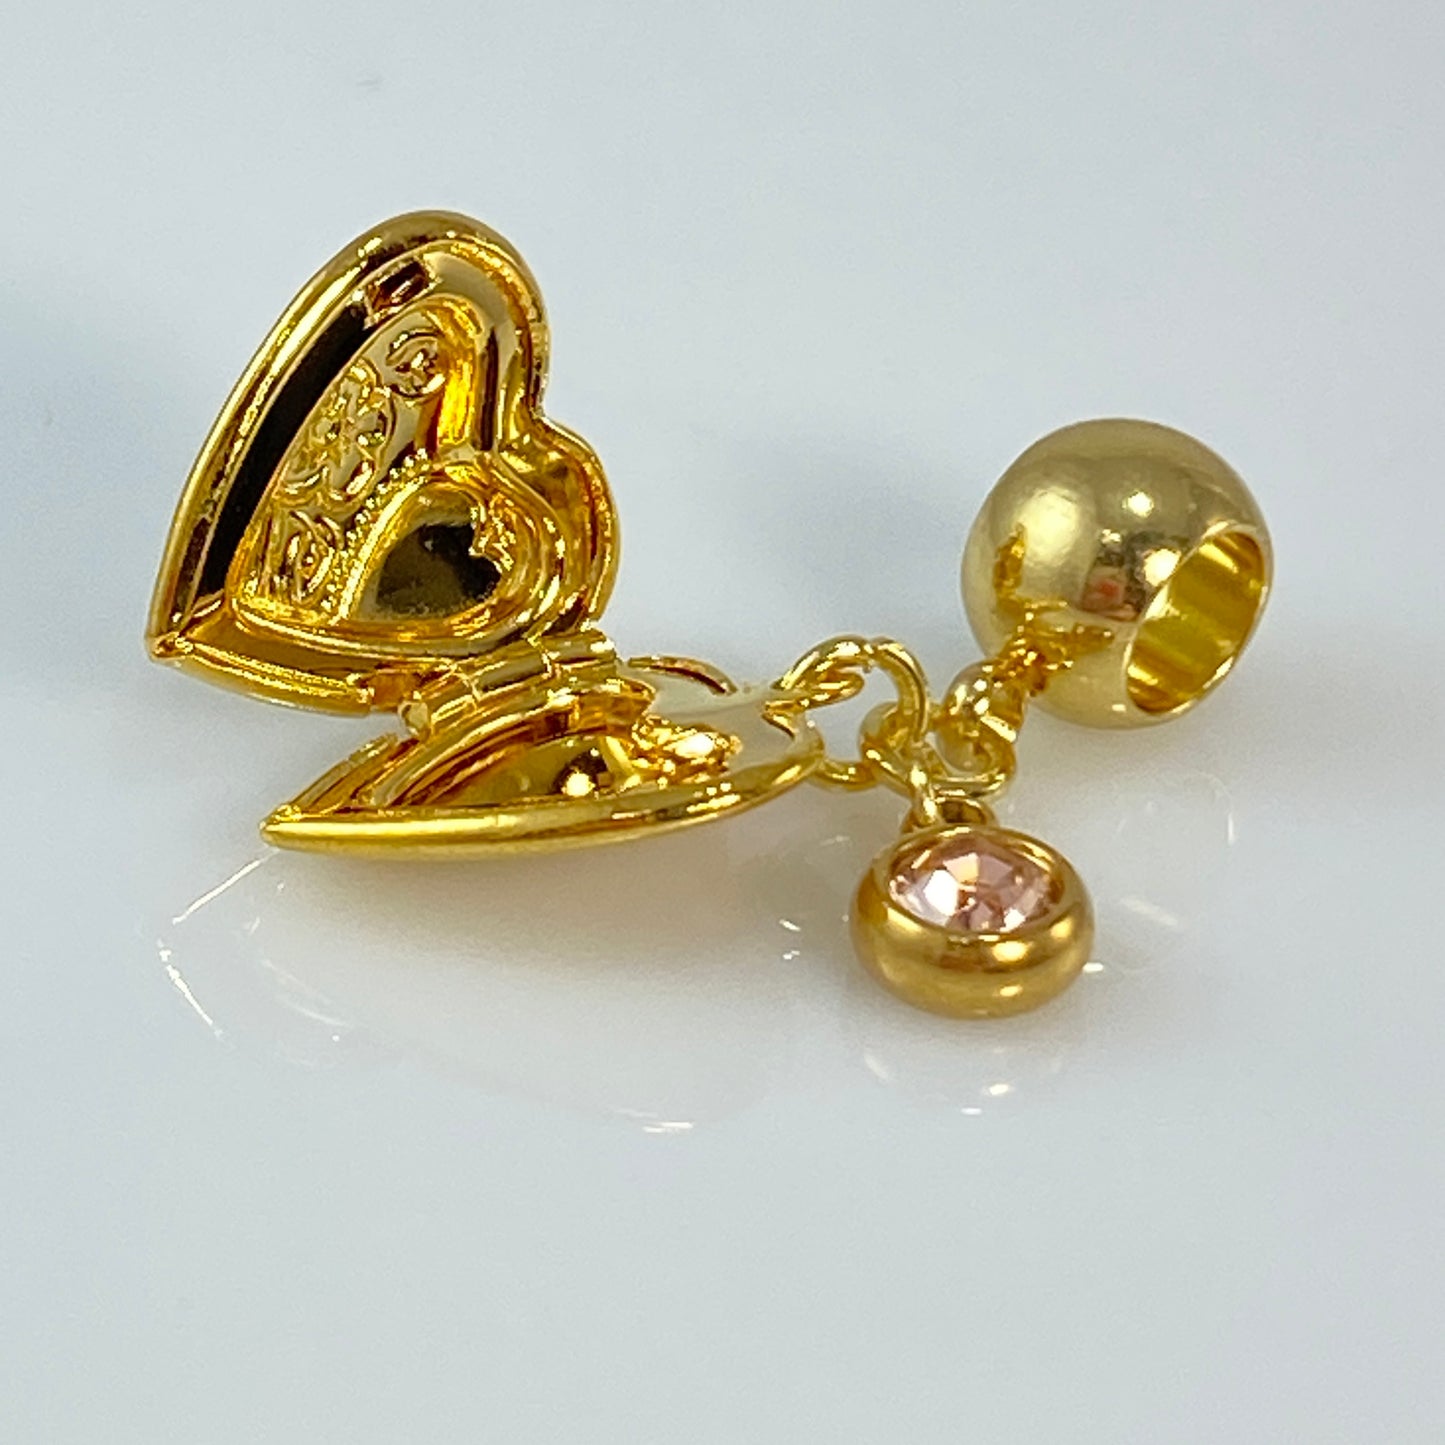 18 kt Gold Plated Openable Heart Locket & Stainless Steel Birthstone Charm or Necklace or Earrings or Keychain